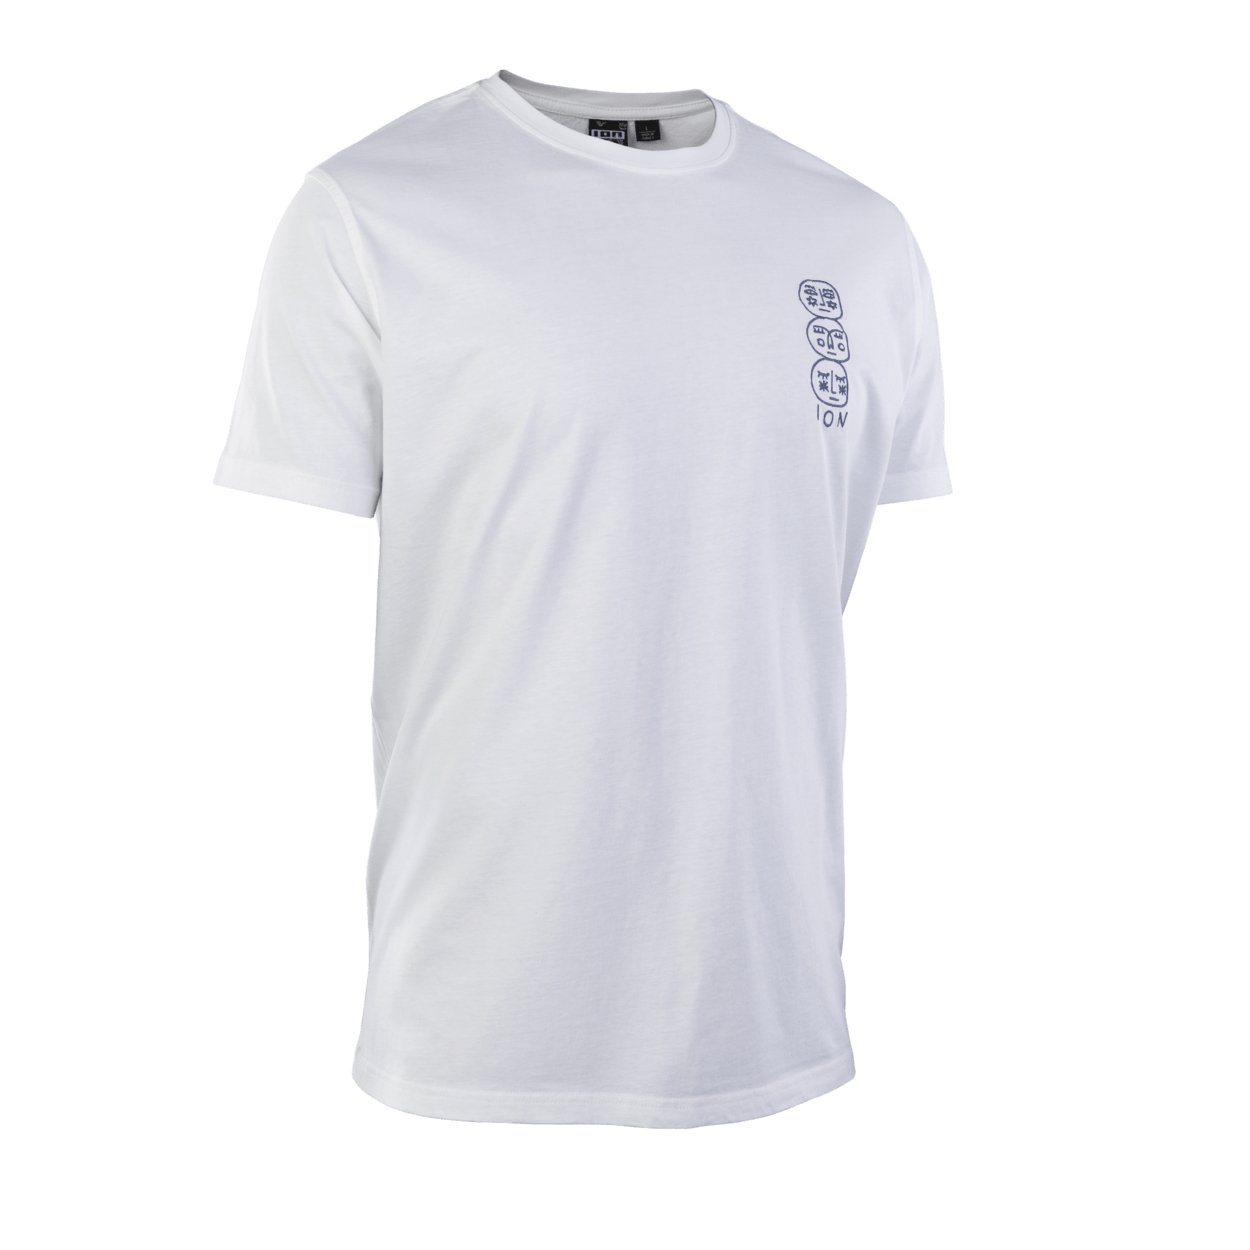 ION Tee Vibes SS men 2024 - Worthing Watersports - 9010583162447 - Apparel - ION Bike